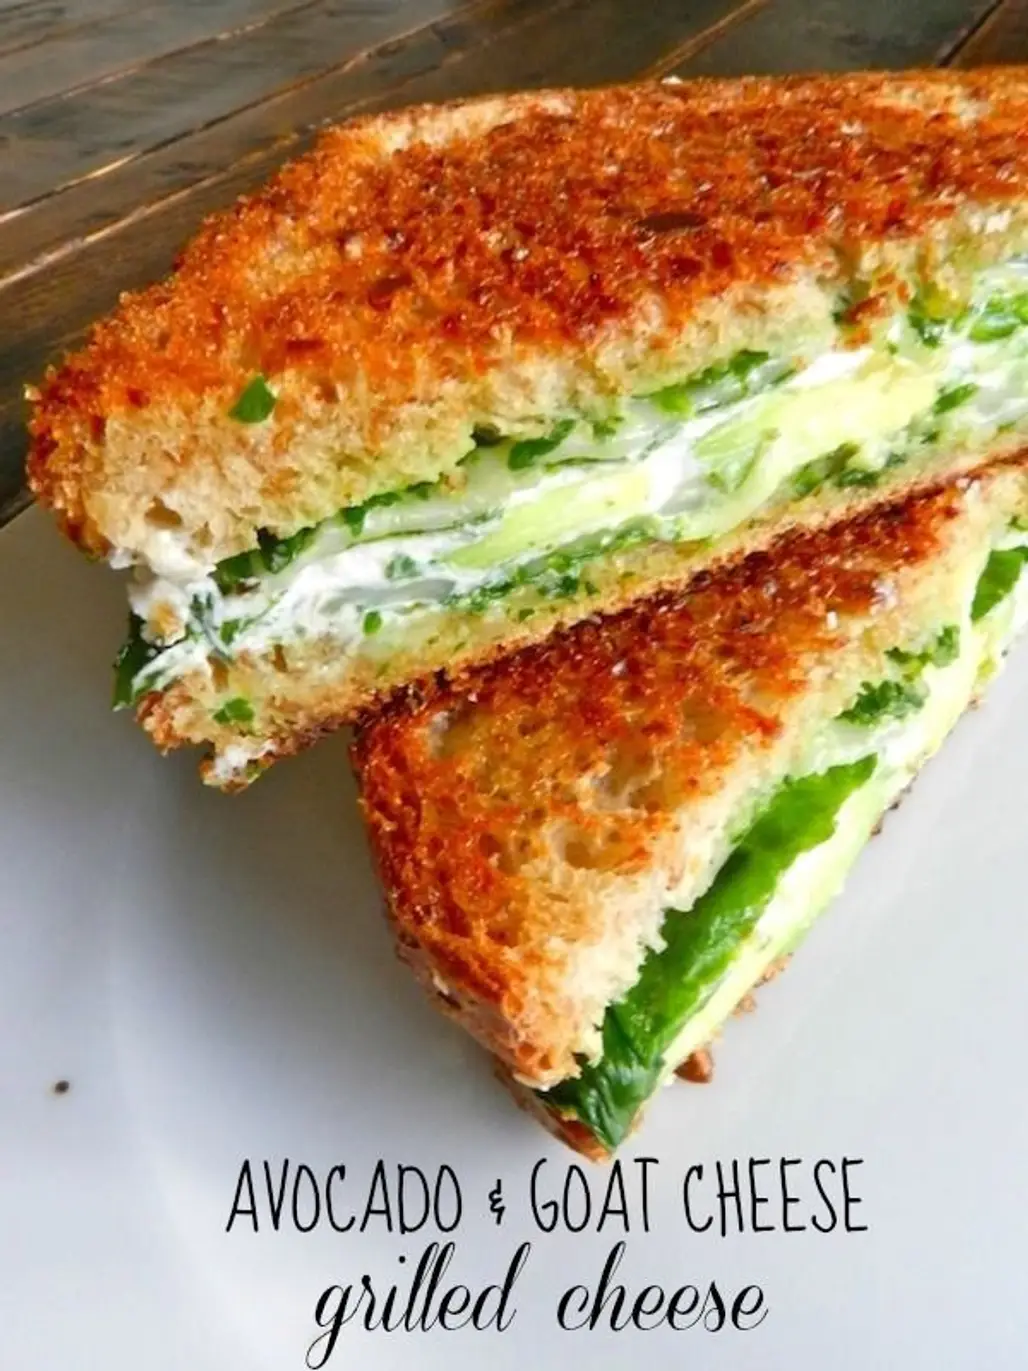 Avocado and Goat Cheese Grilled Cheese